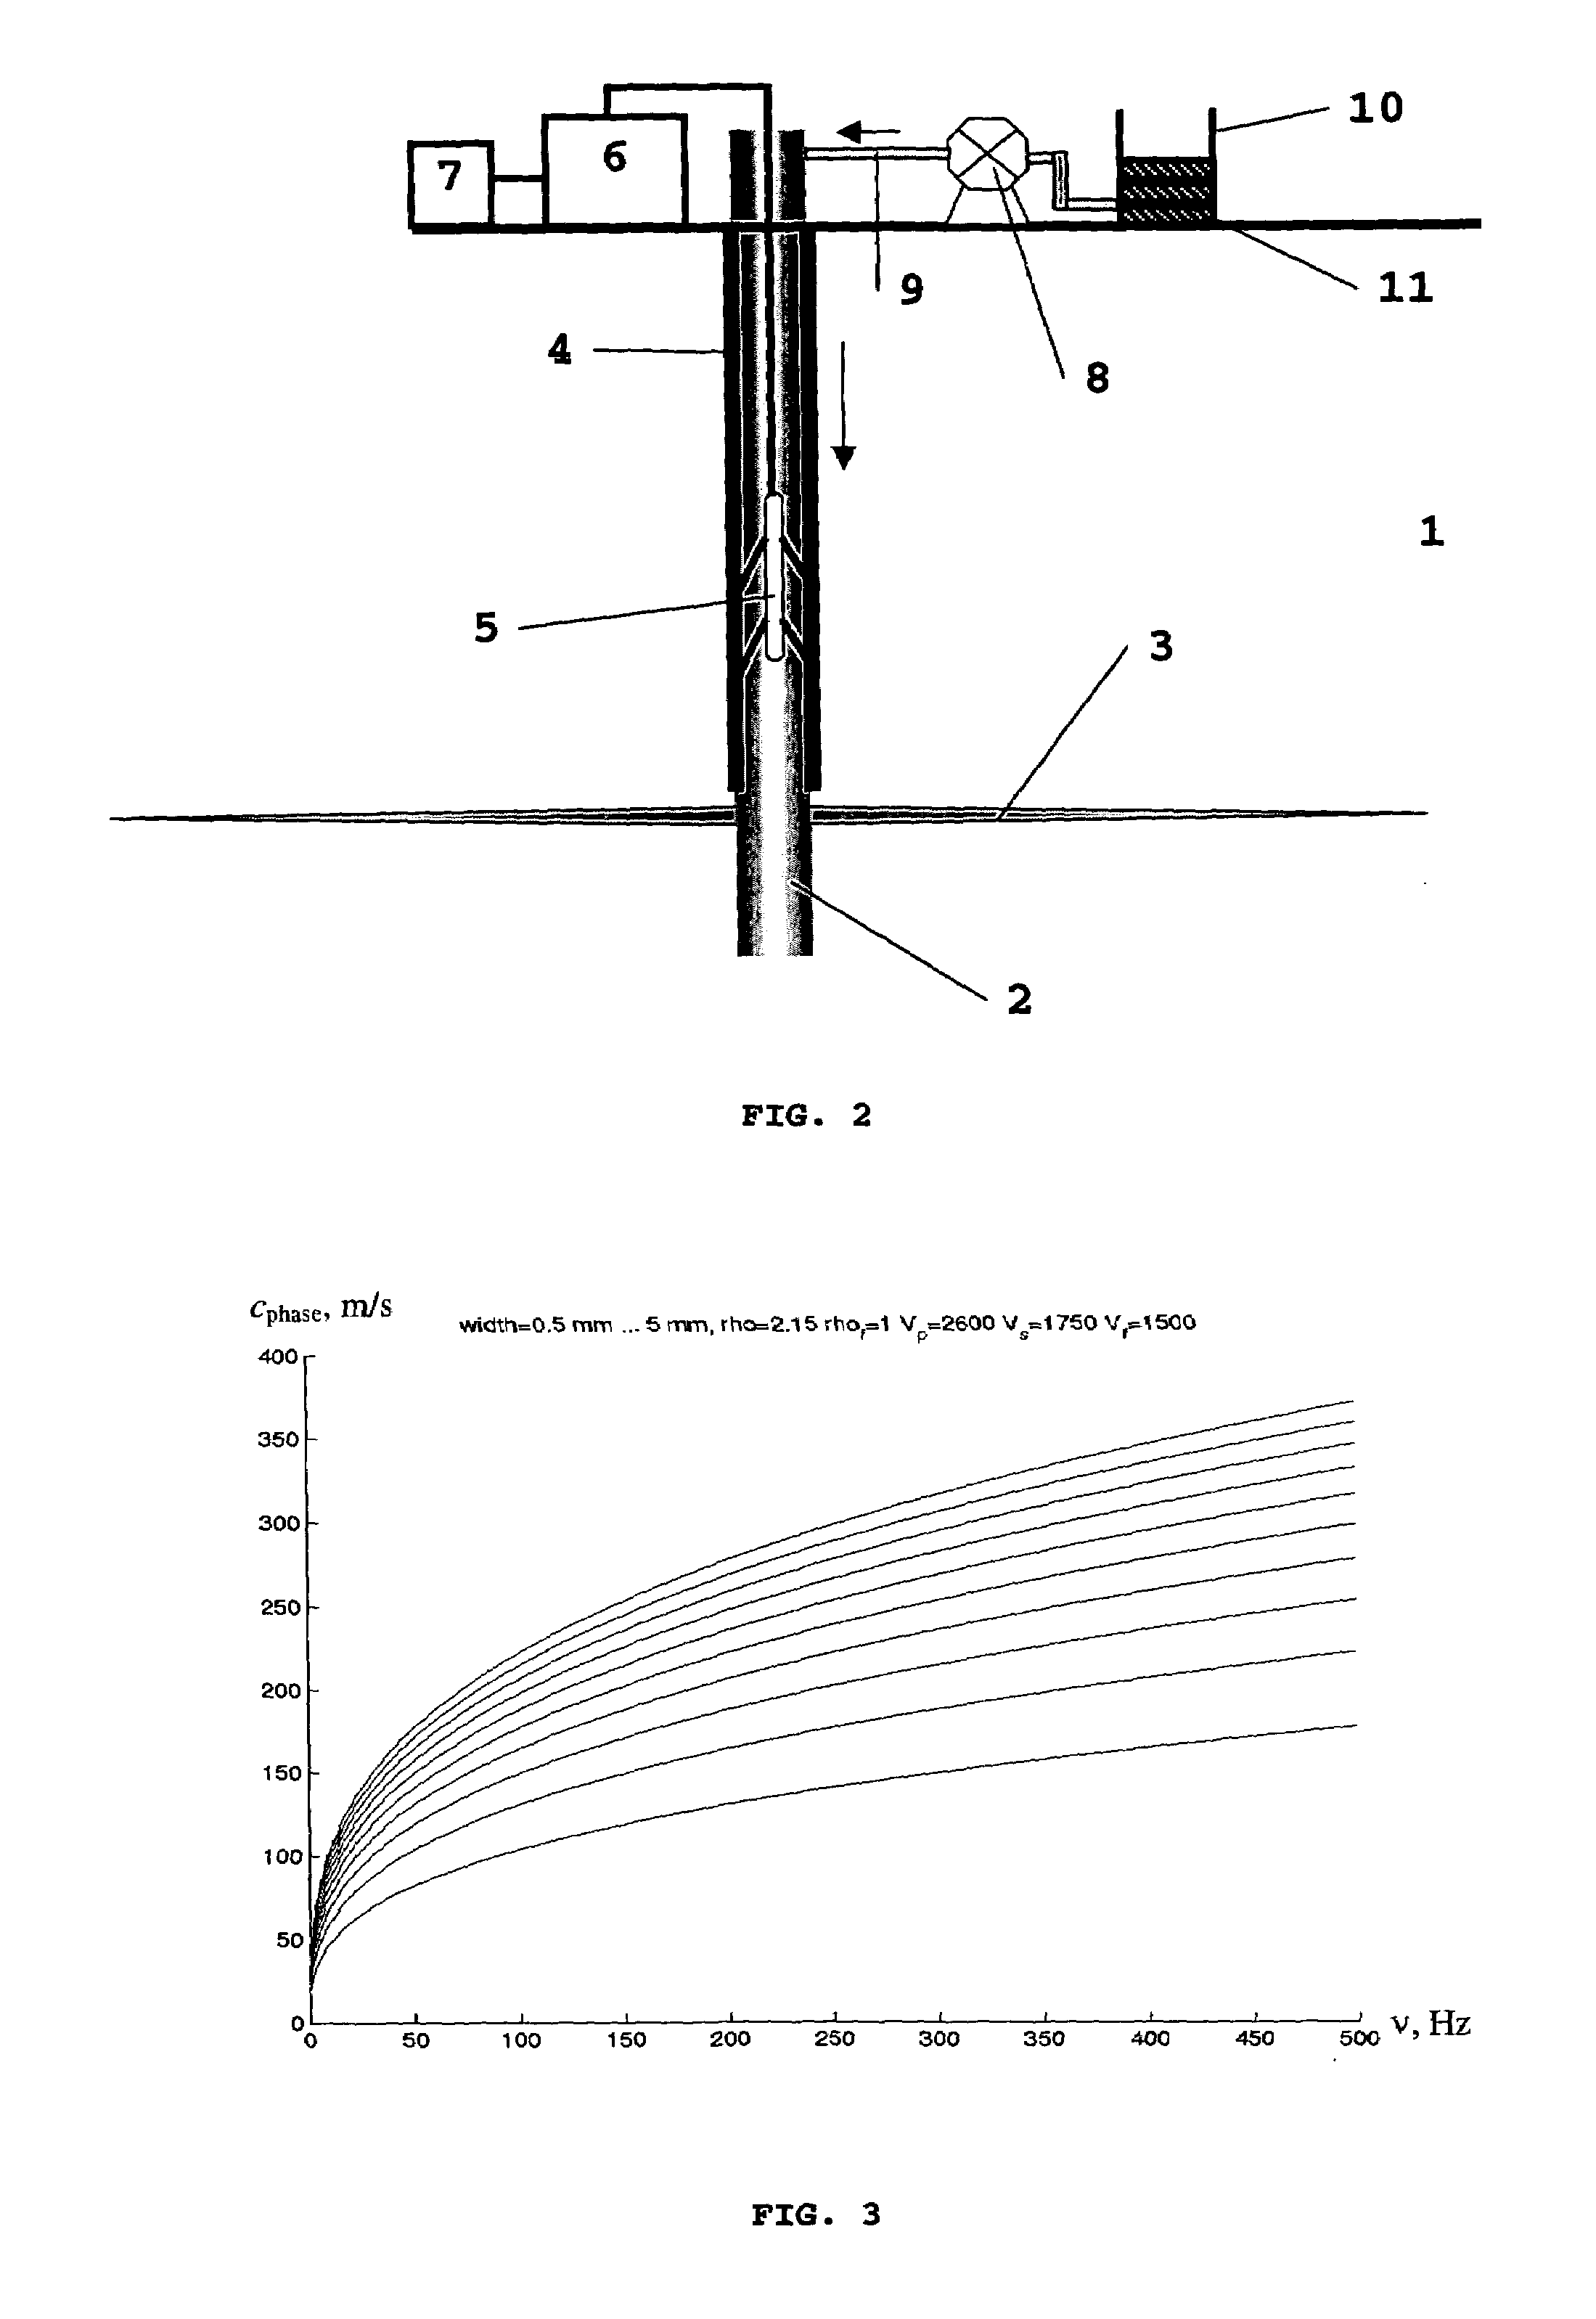 Method and system for monitoring of fluid-filled domains in a medium based on interface waves propagating along their surfaces